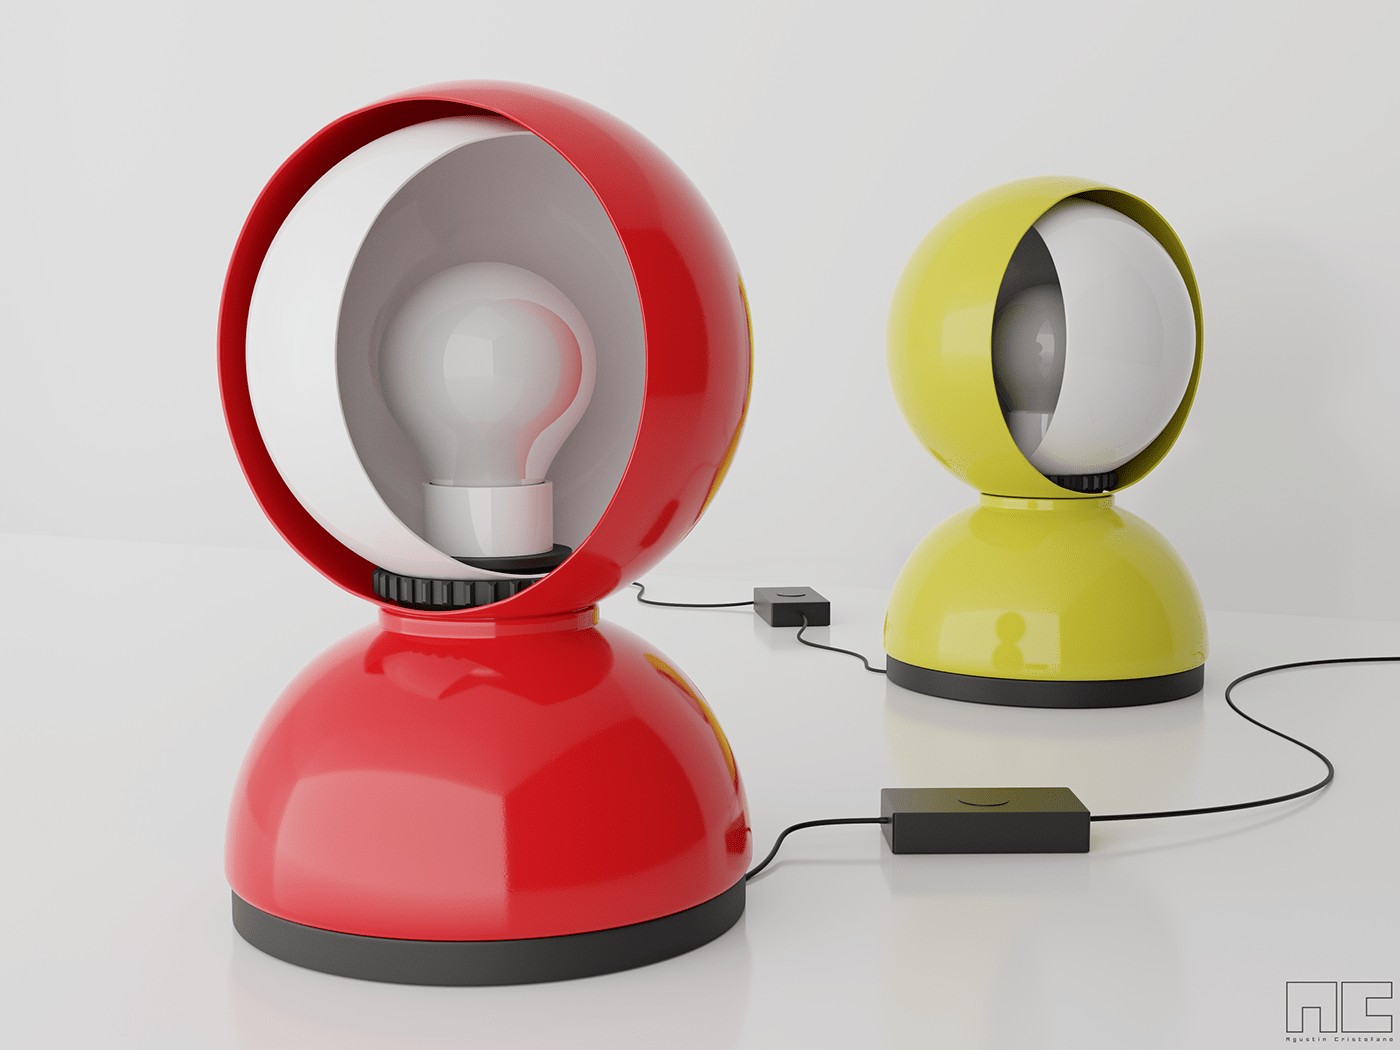 blender design eclisse iconic industrial Lamp magistretti product Render visualization